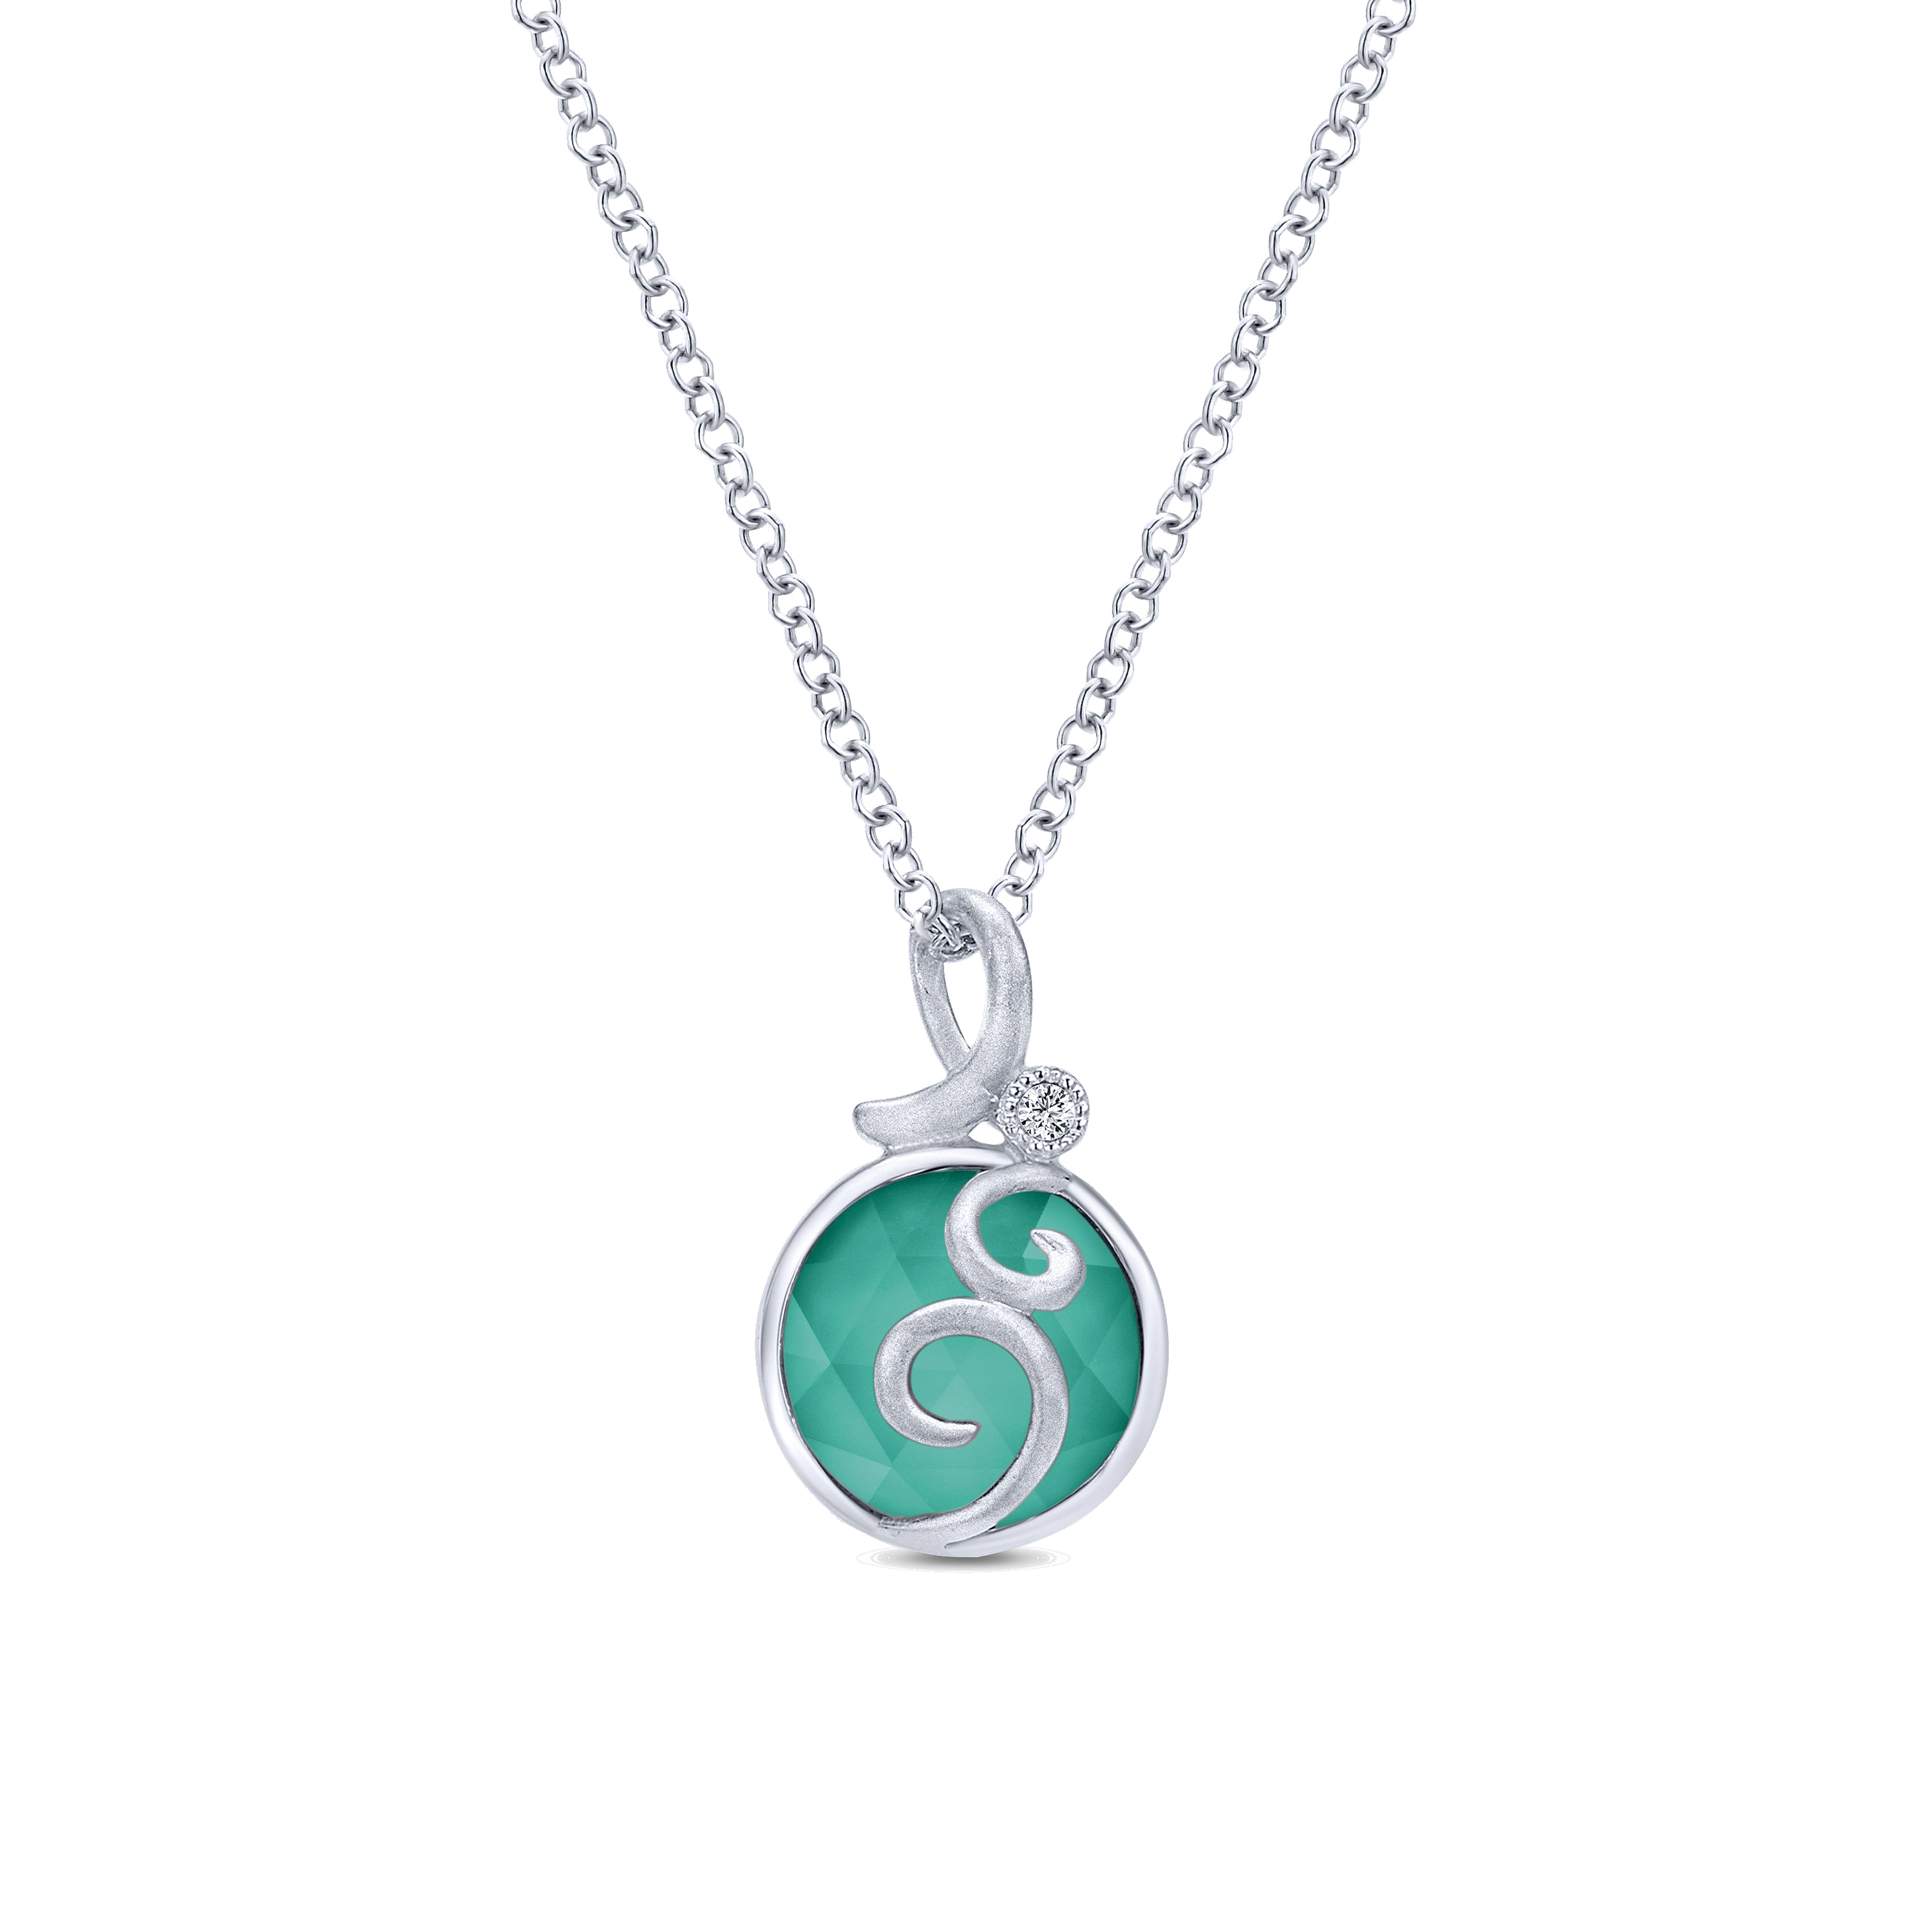 18 inch 925 Sterling Silver Rock Crystal/Green Onyx Pendant Necklace with Swirls